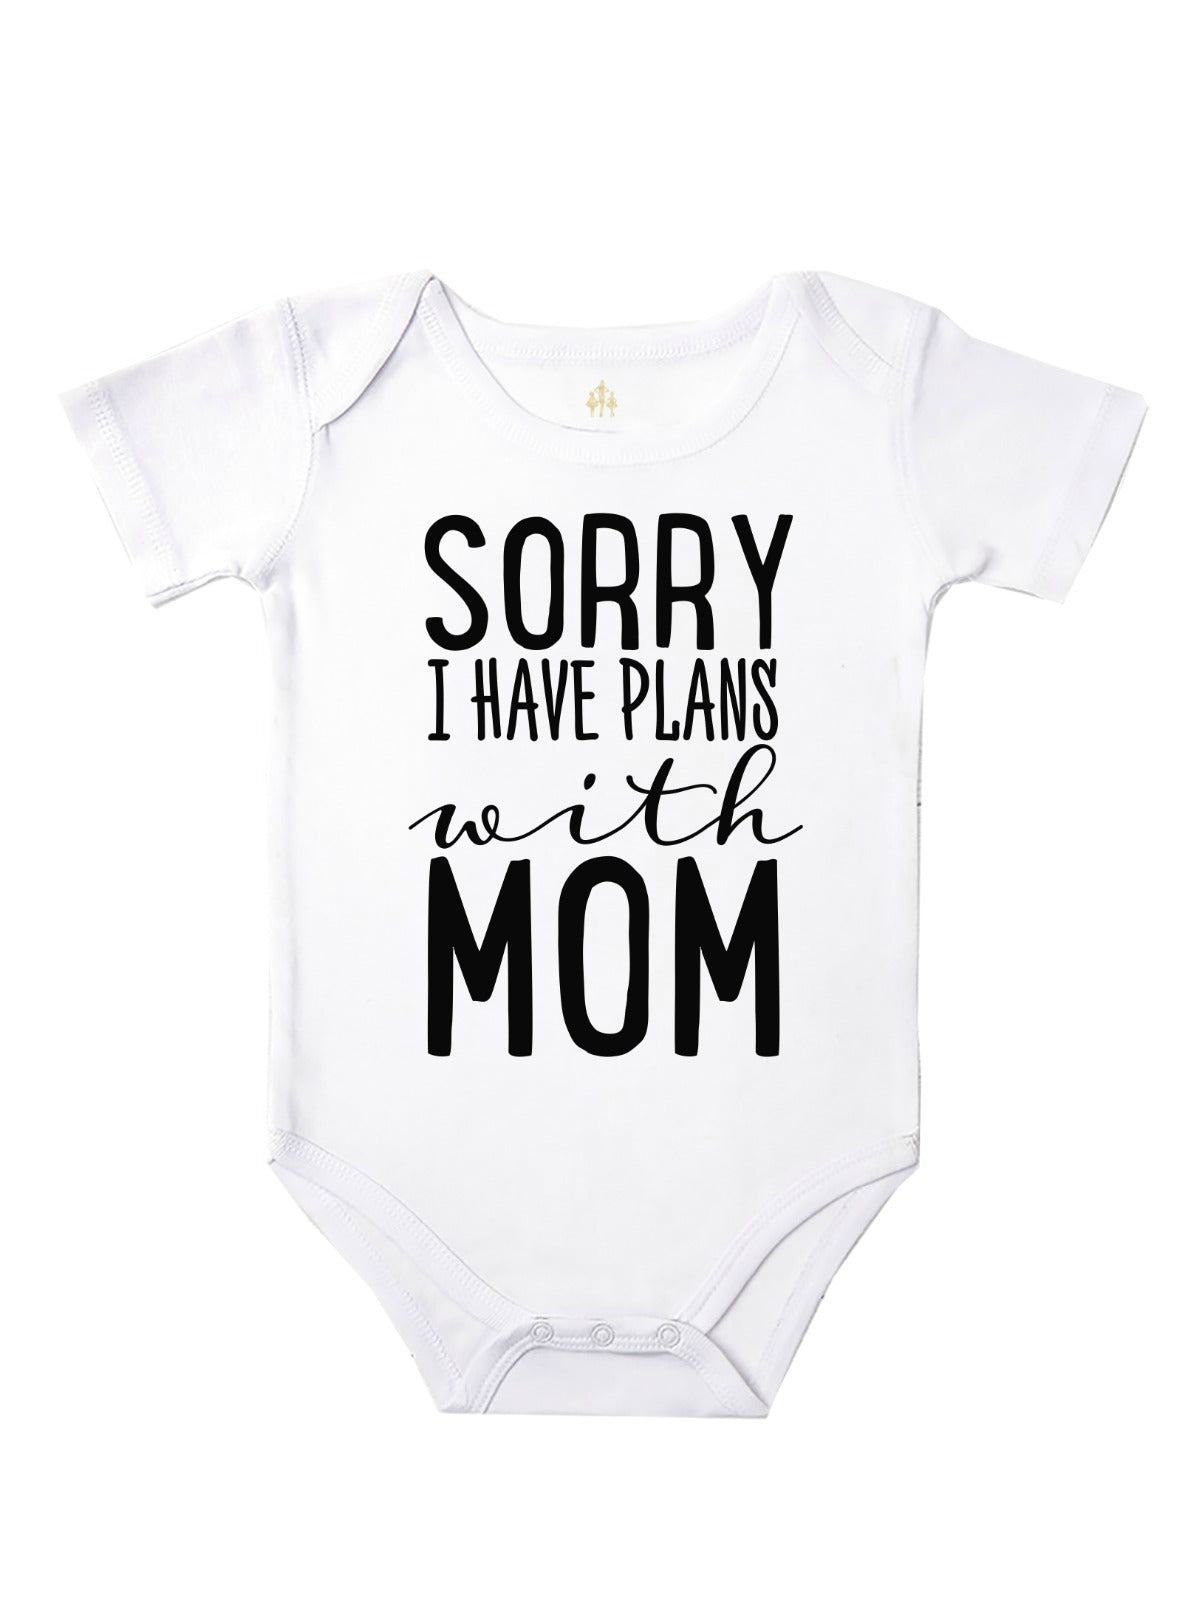 Sorry I Have Plans With Mom Funny Baby Bodysuit